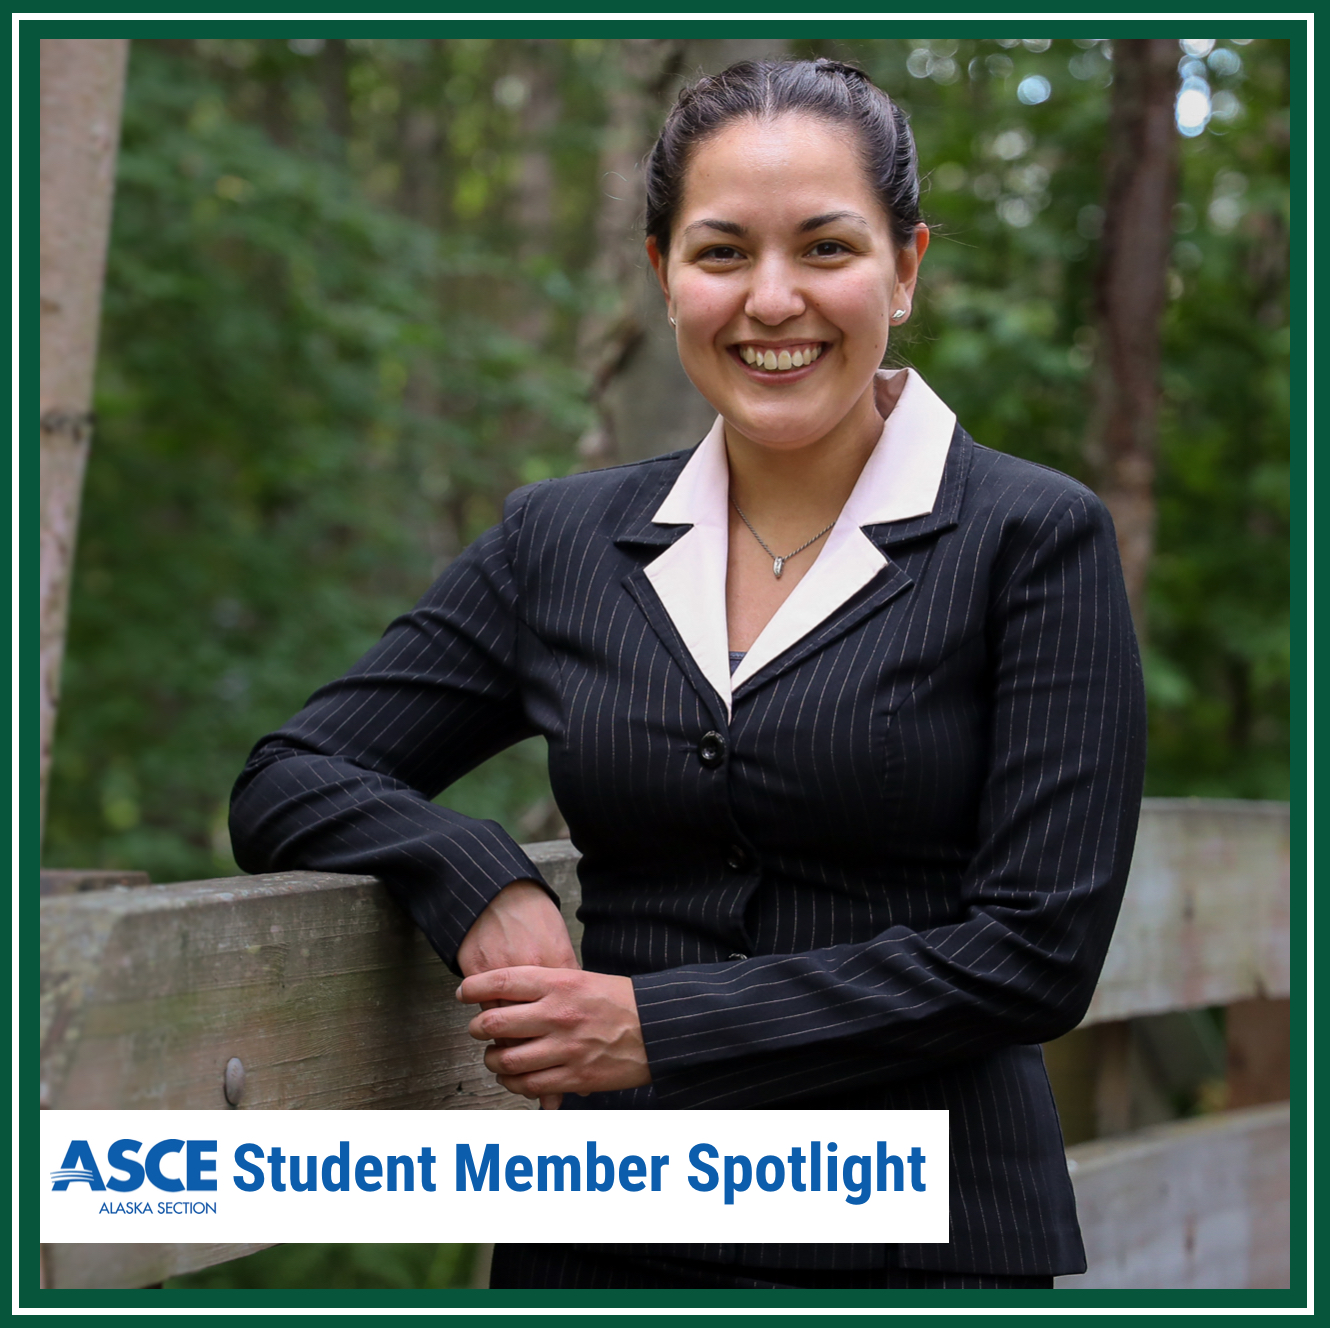 Shoshanna Johnson standing on a bridge with the ASCE logo at the bottom and "student member spotlight" tag at the bottom.